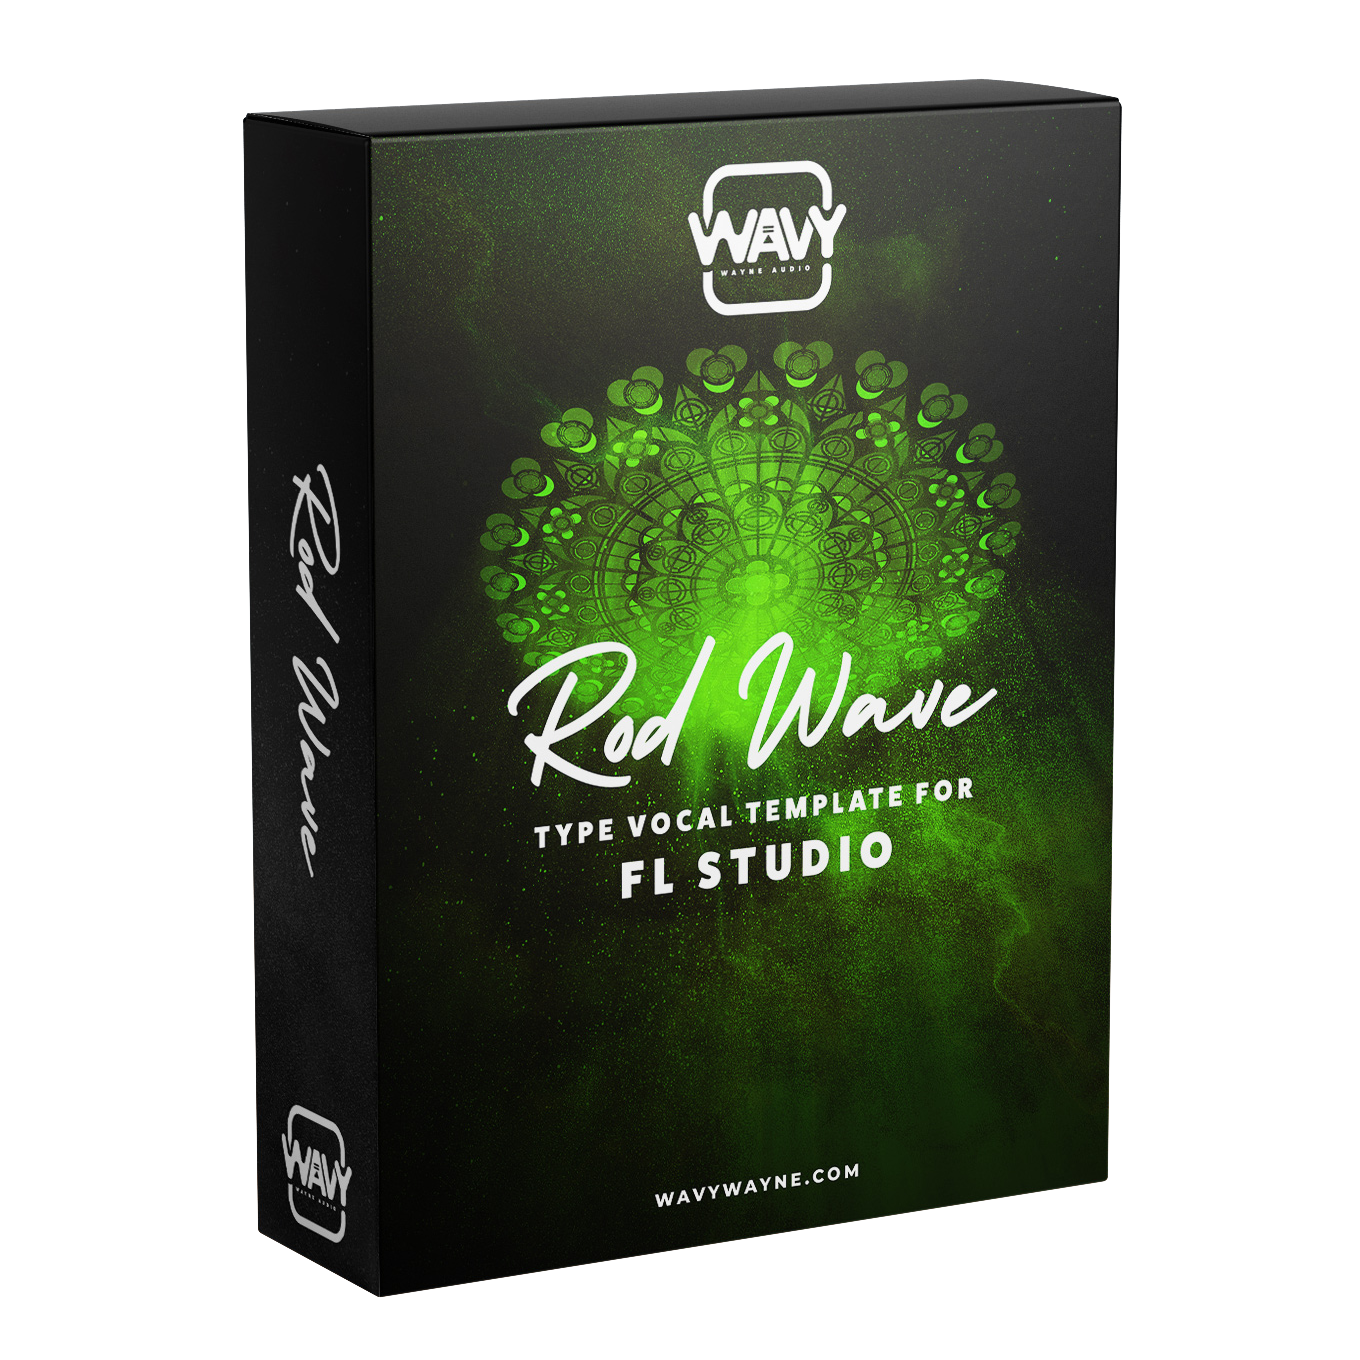 Rod Wave Type Vocal Template for FL Studio